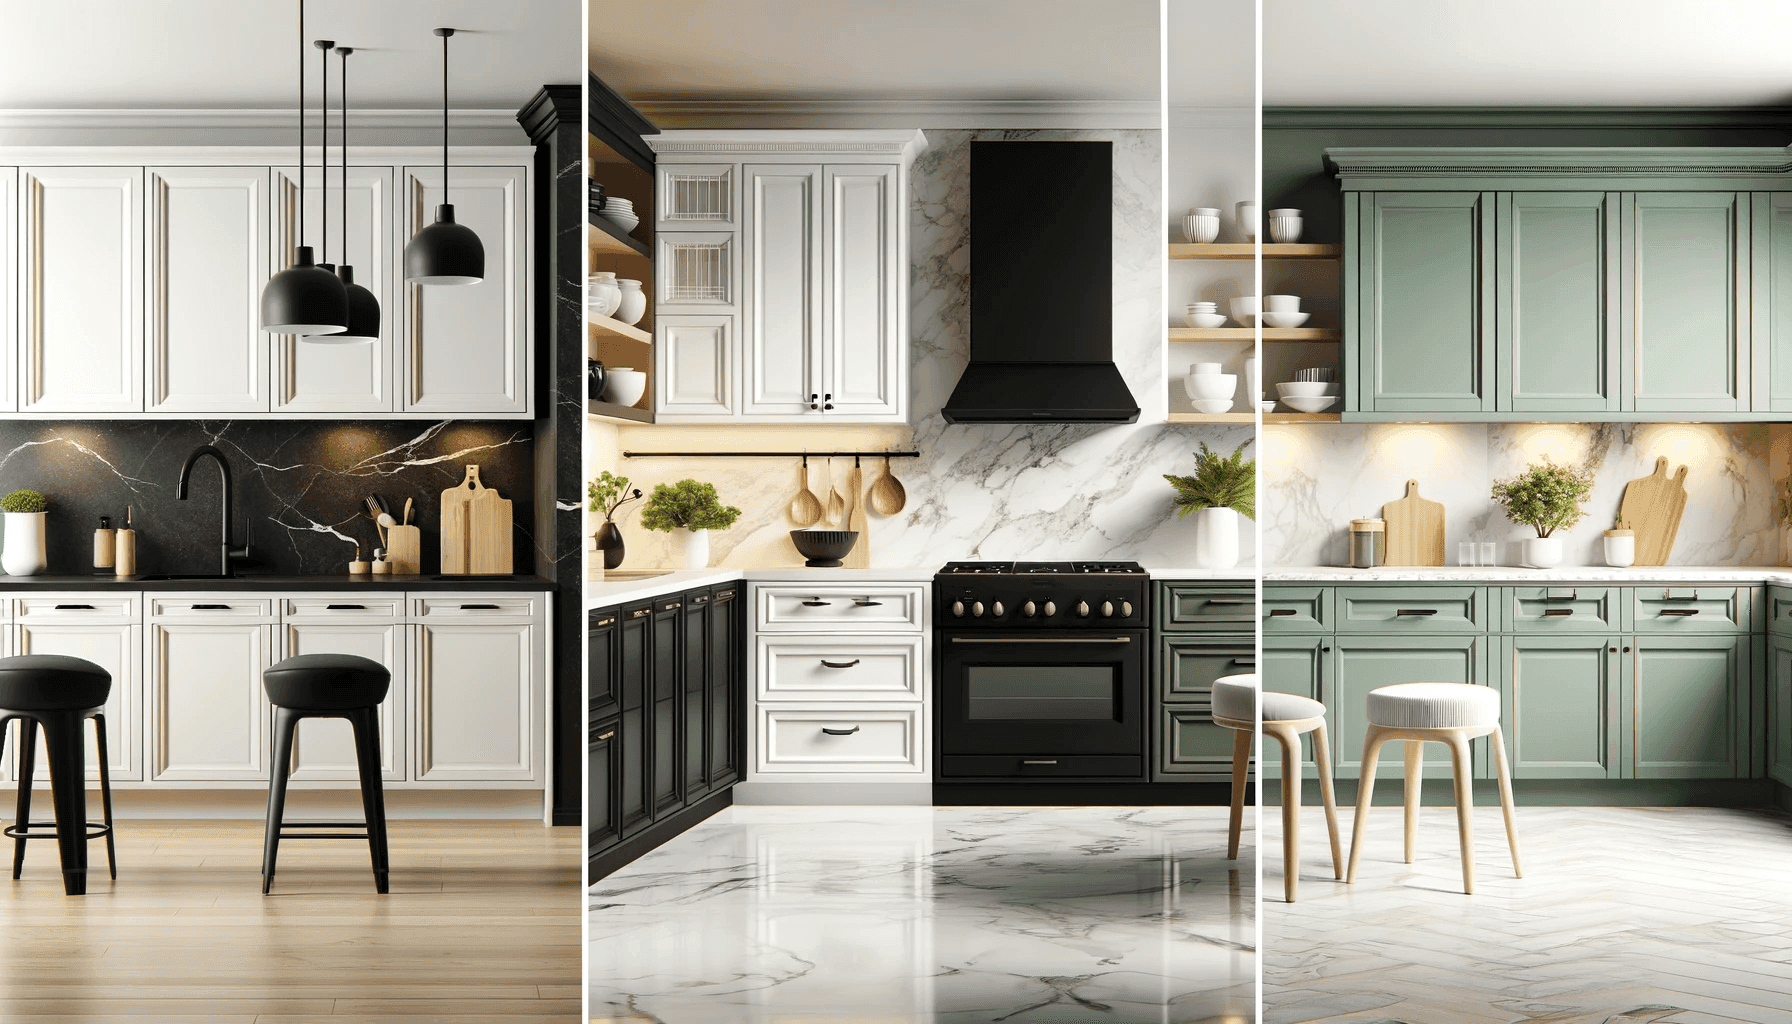 DALL·E 2023-12-13 09.40.50 - Three different kitchen designs side by side for a landing page about kitchen color schemes. On the left, a kitchen with matte black cabinetry, black .png